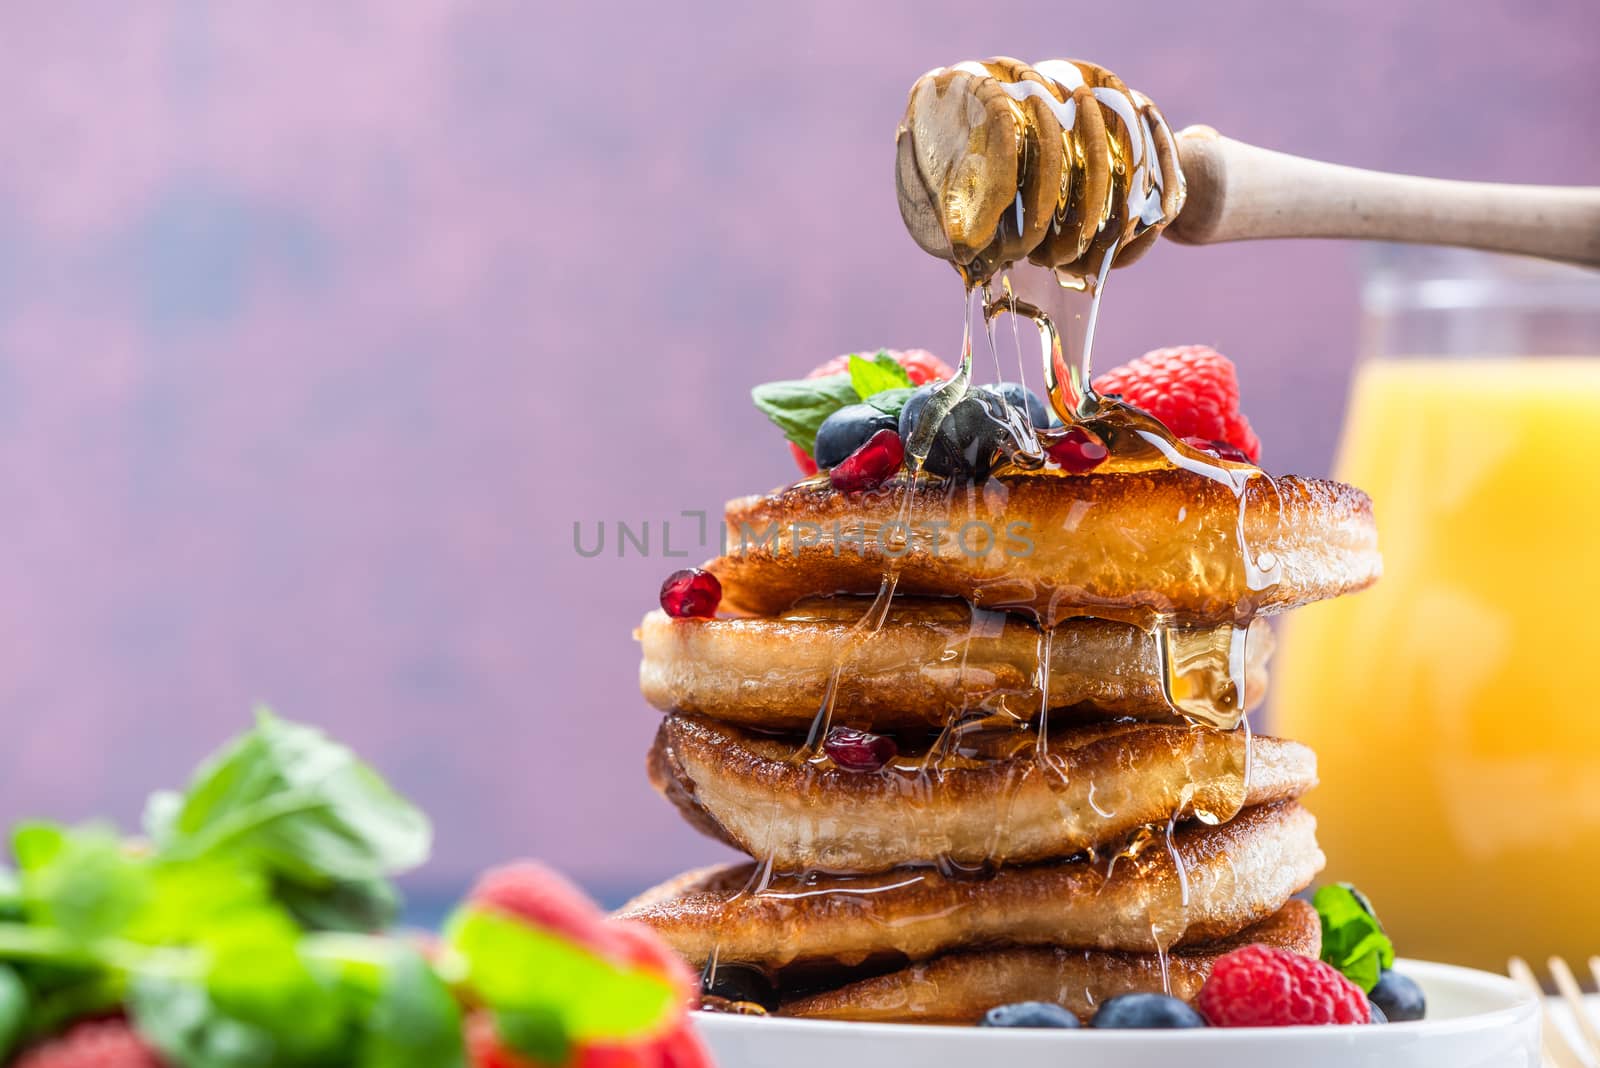 Pouring Honey on Pancakes Stack Topped with fresh Fruits. Shrove Tuesday Breakfast.